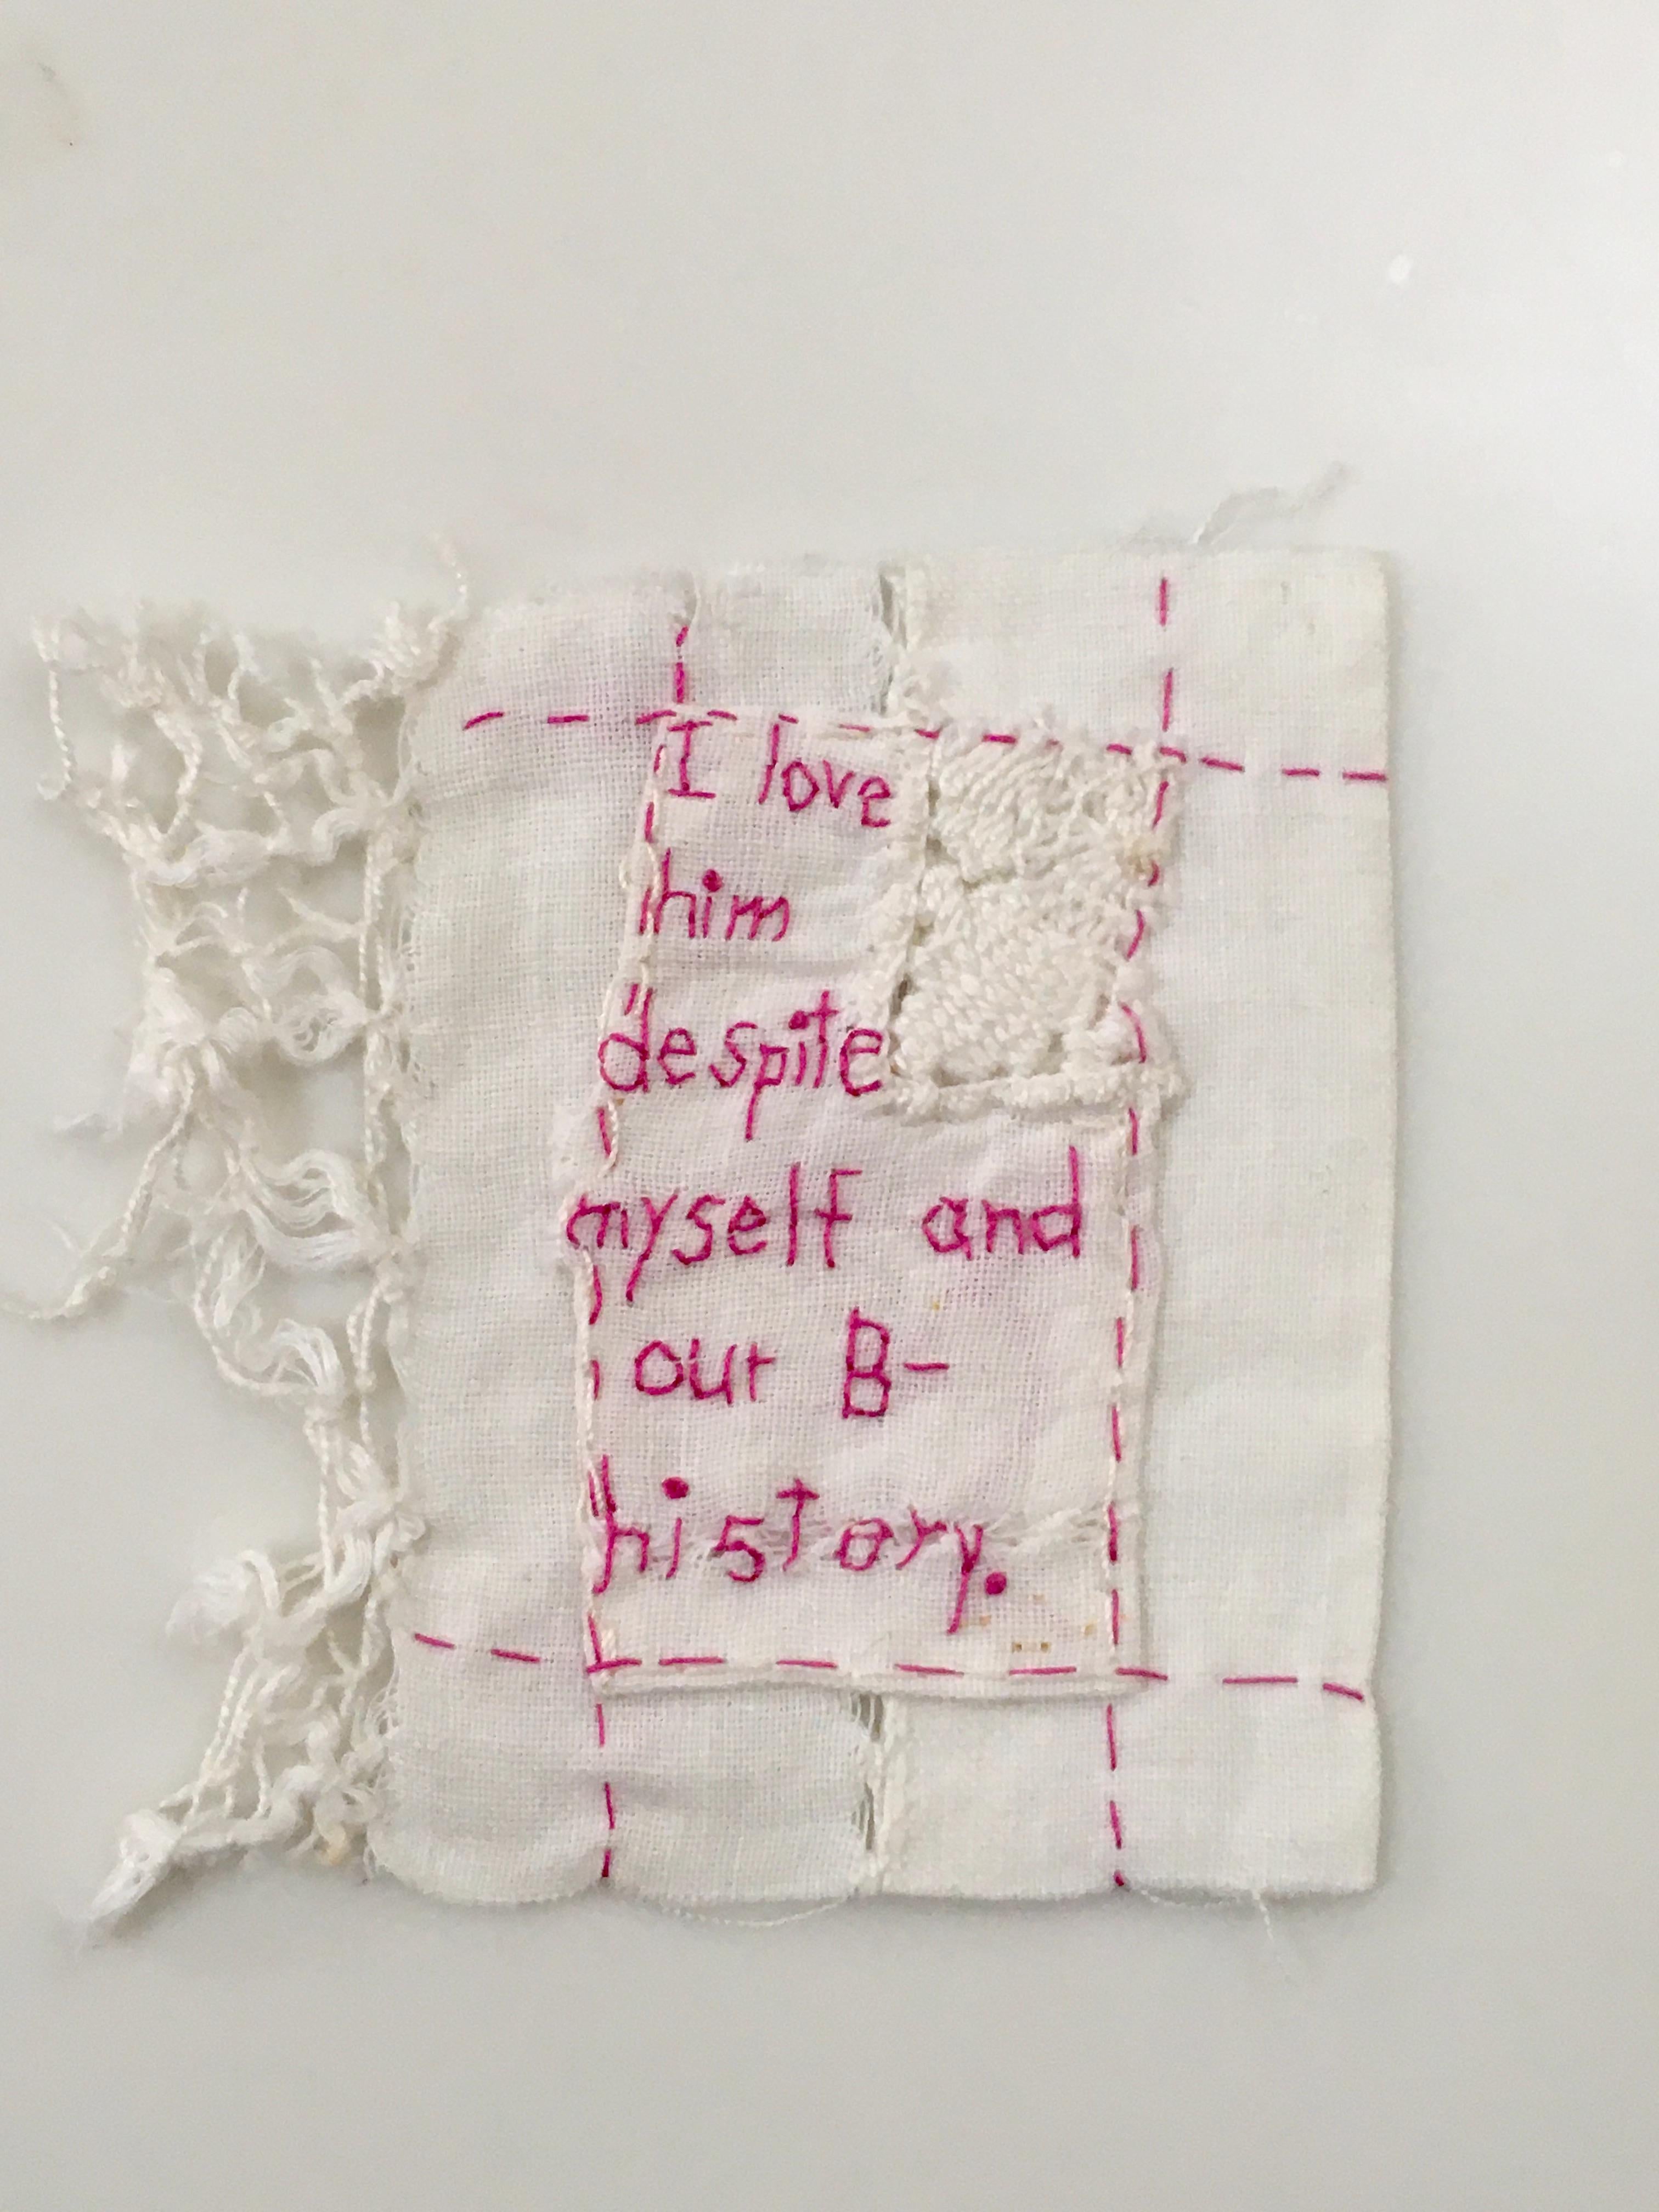 B- Story - love narrative embroidery pink thread on white vintage fabric - Mixed Media Art by Iviva Olenick